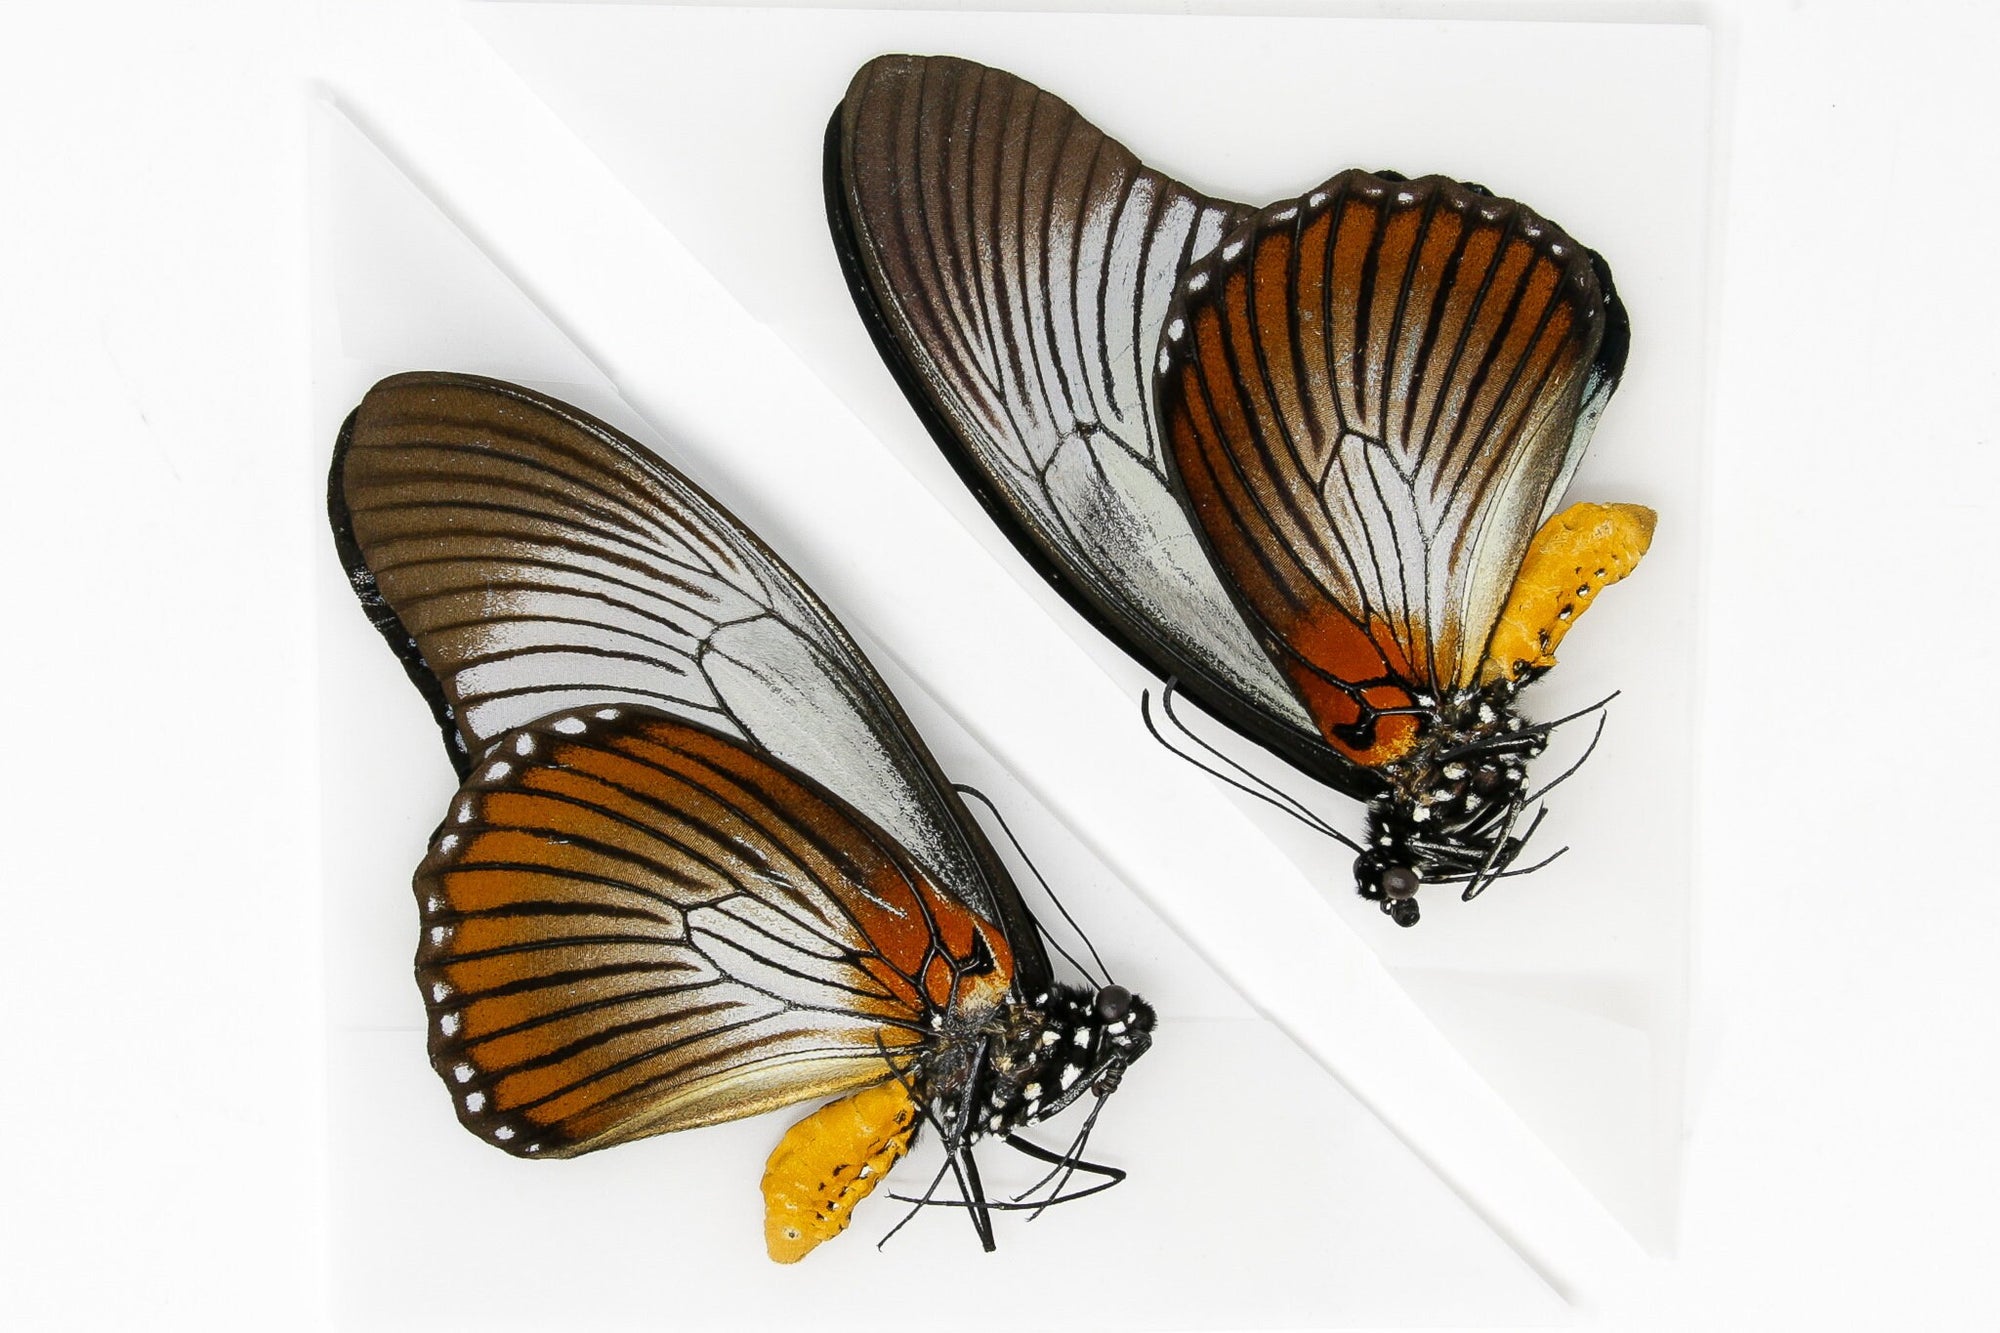 2 x The Giant Blue Swallowtail, Papilio zalmoxis A1/A1-, Unmounted Papered Butterflies Real Entomology Specimens